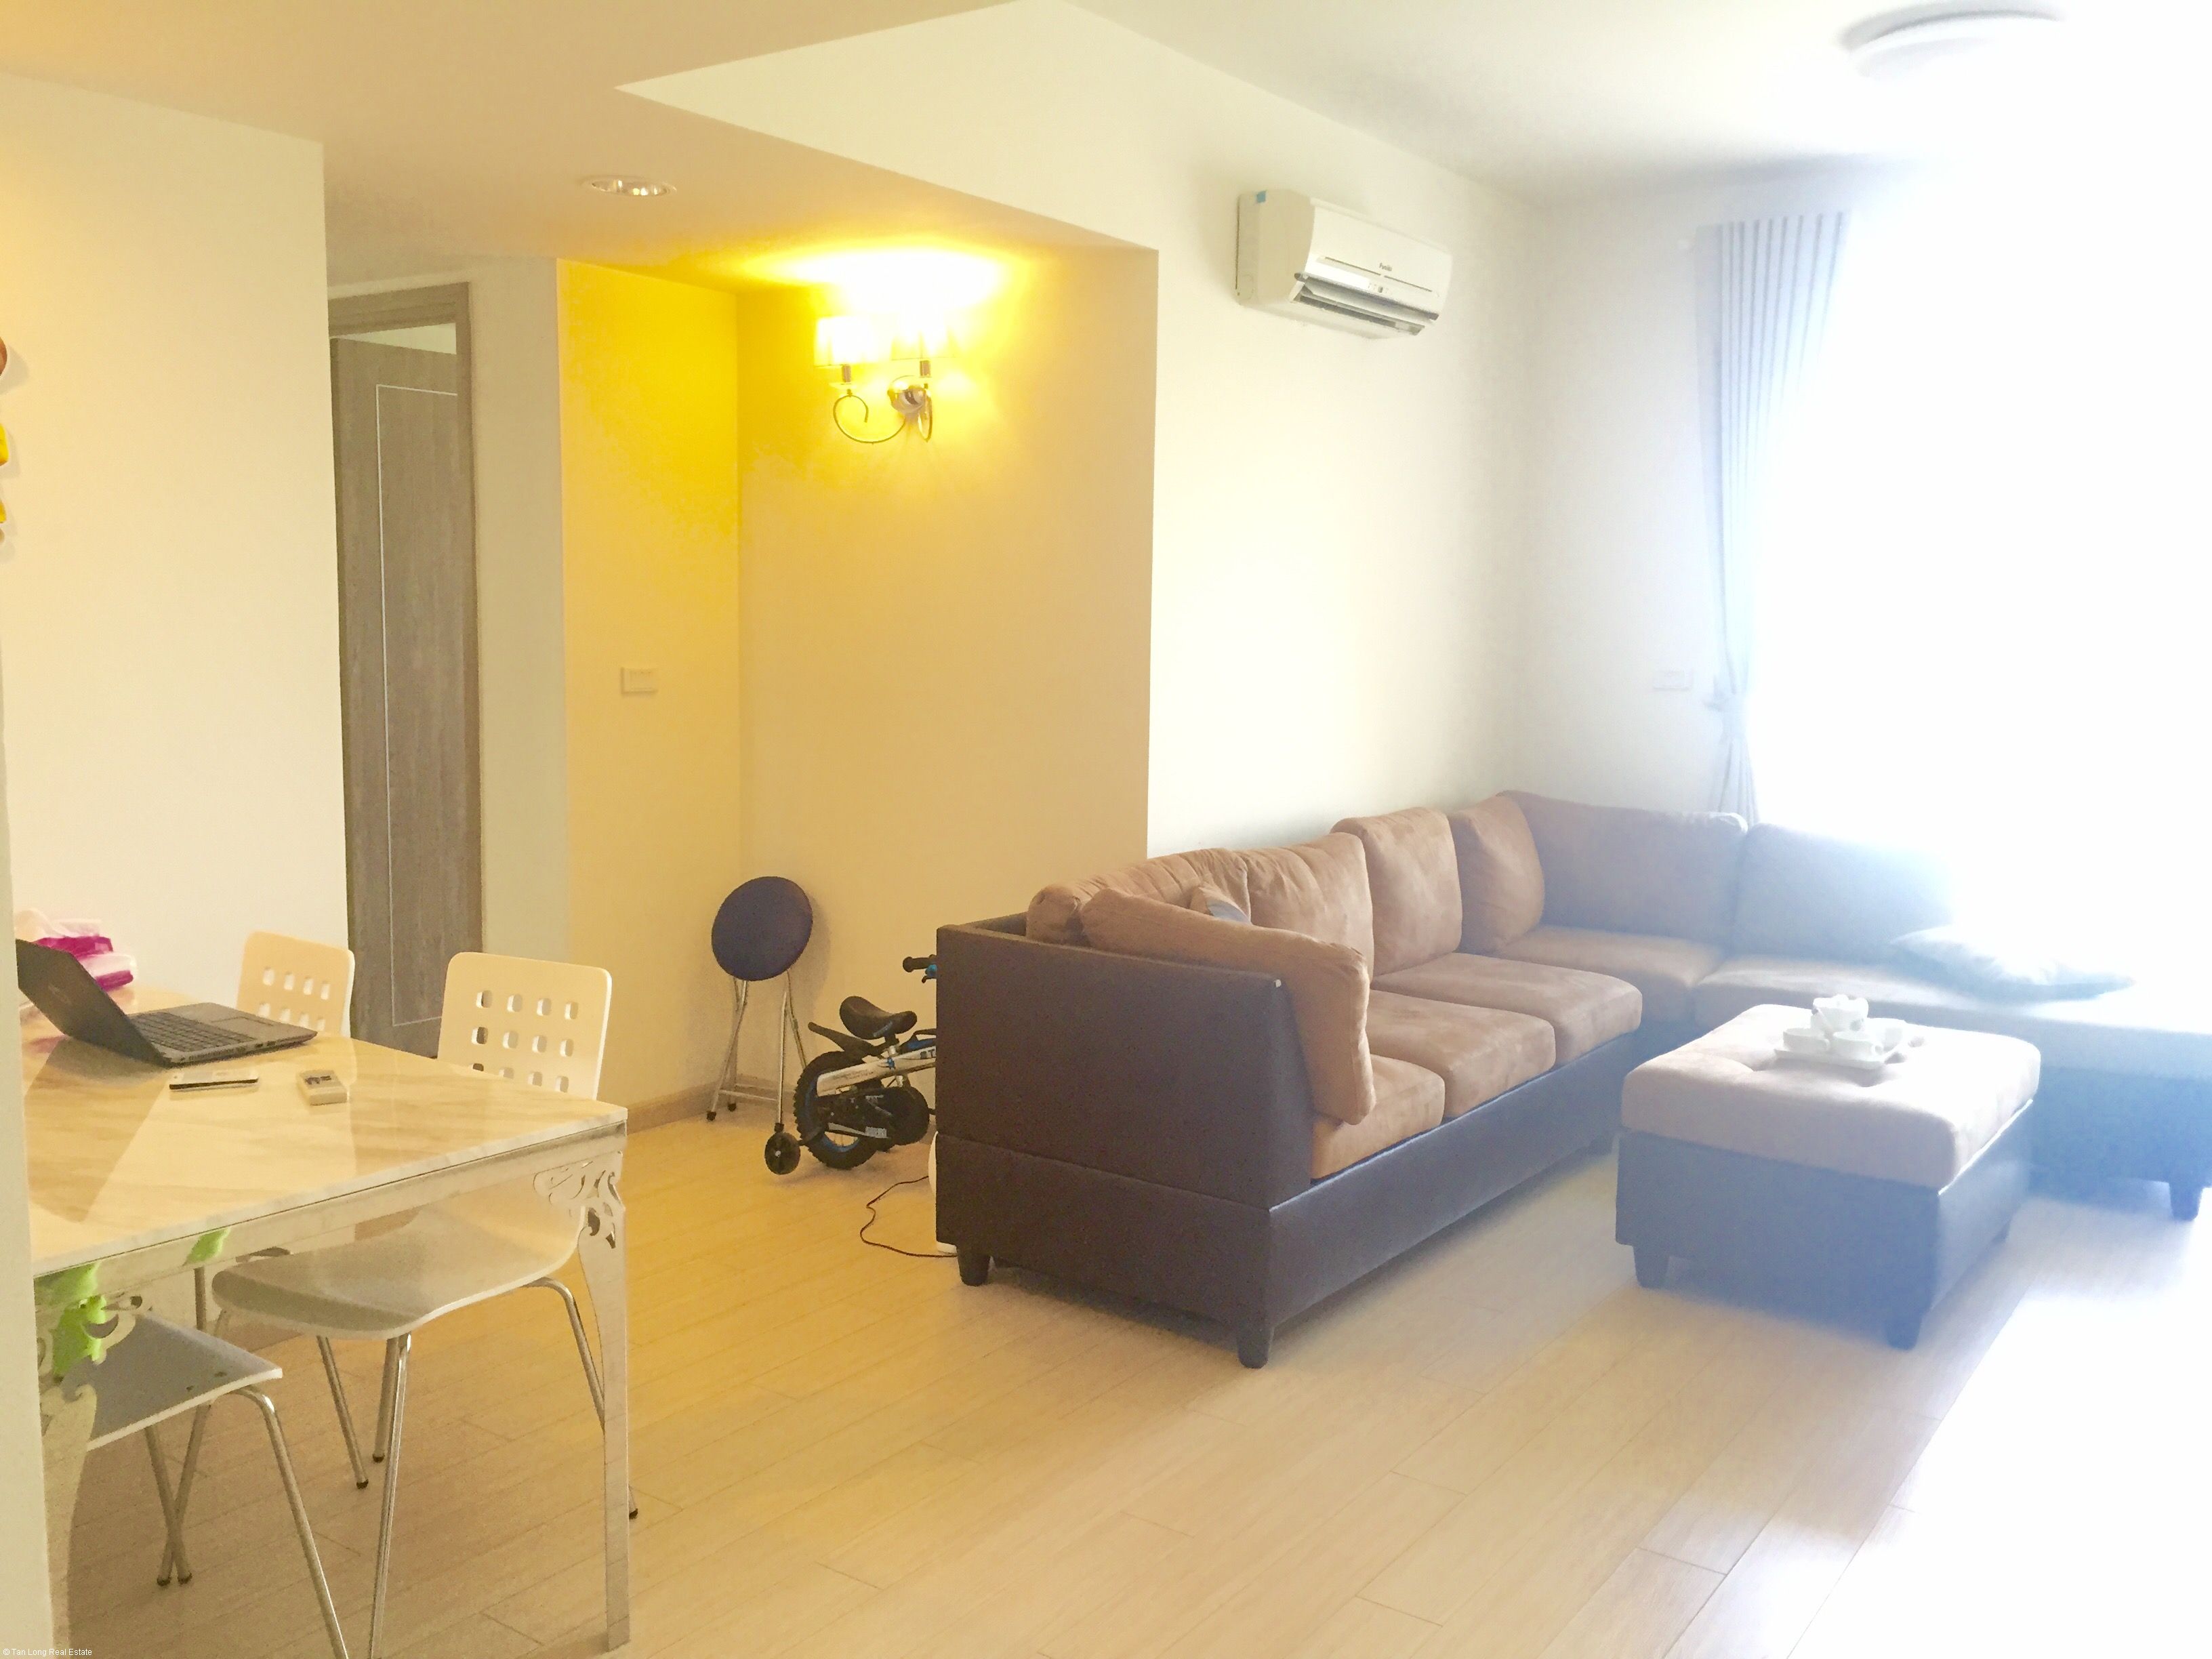 3 bedroom apartment for rent in Palm Forest, Ecopark, Hanoi 1